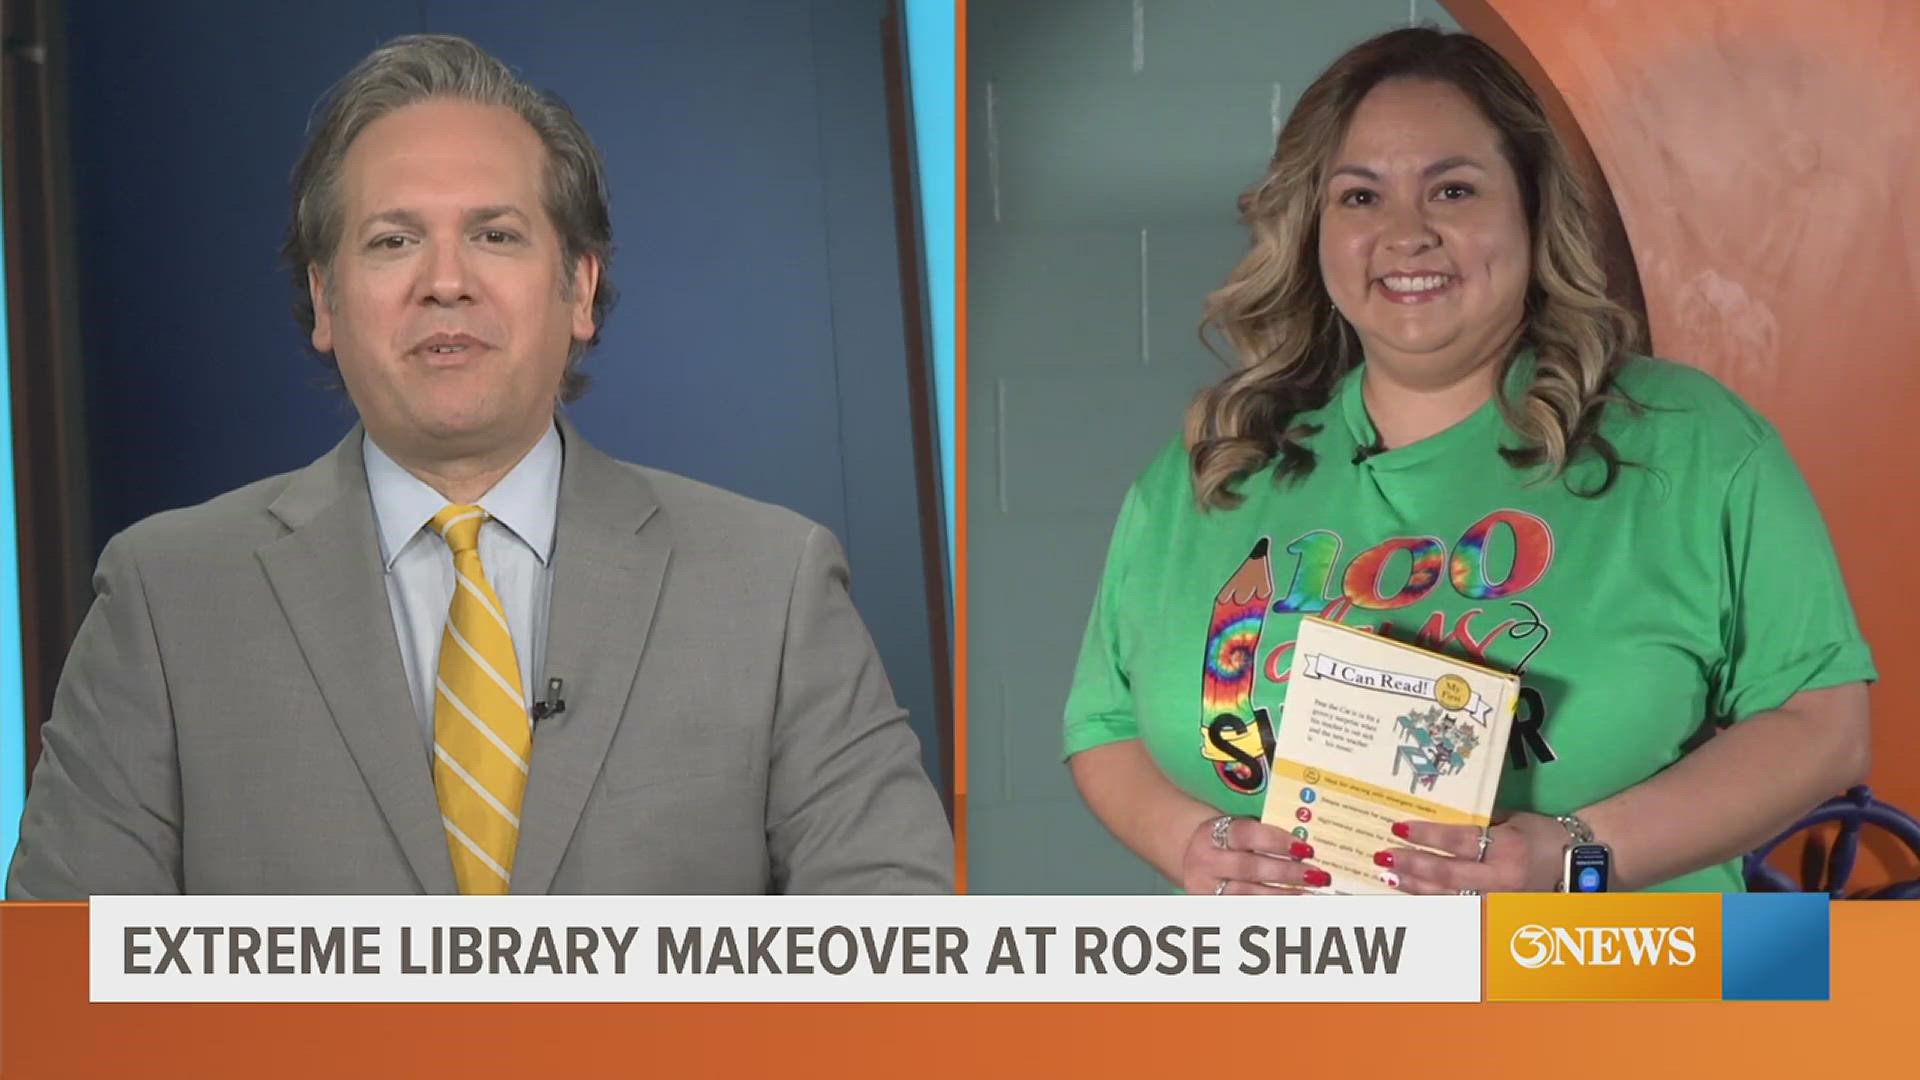 Rose Shaw Elementary School Principal Christine Bernal joined us live with details on the improvements to their library.